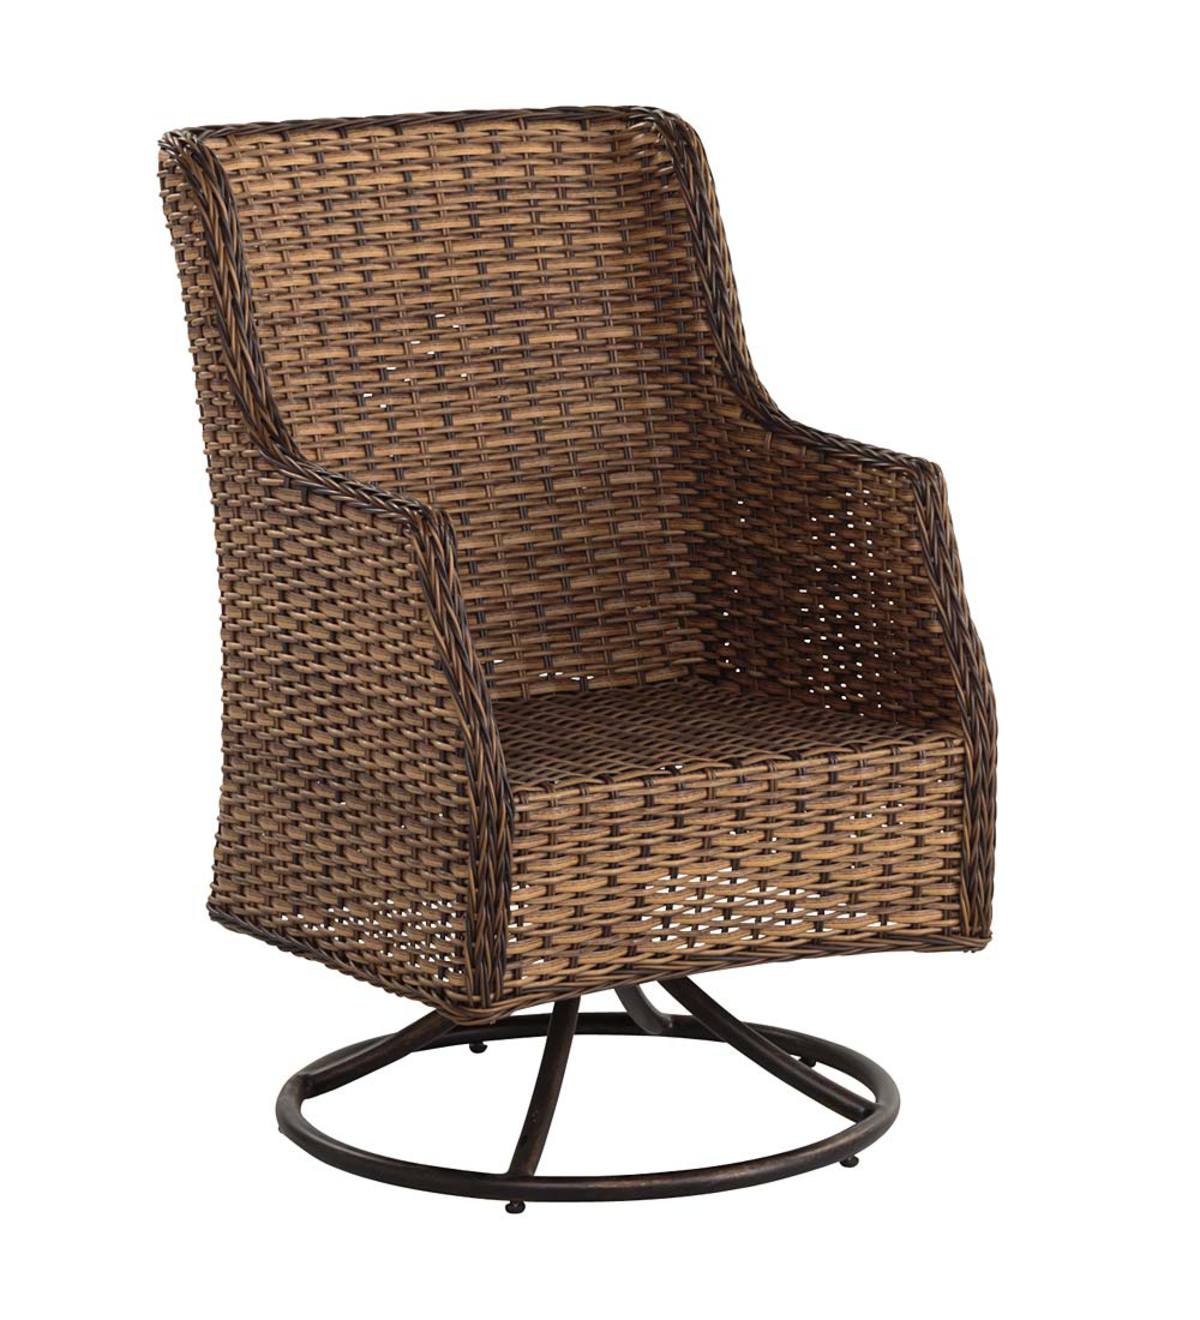 Highland Wicker Outdoor Swivel Dining Chair